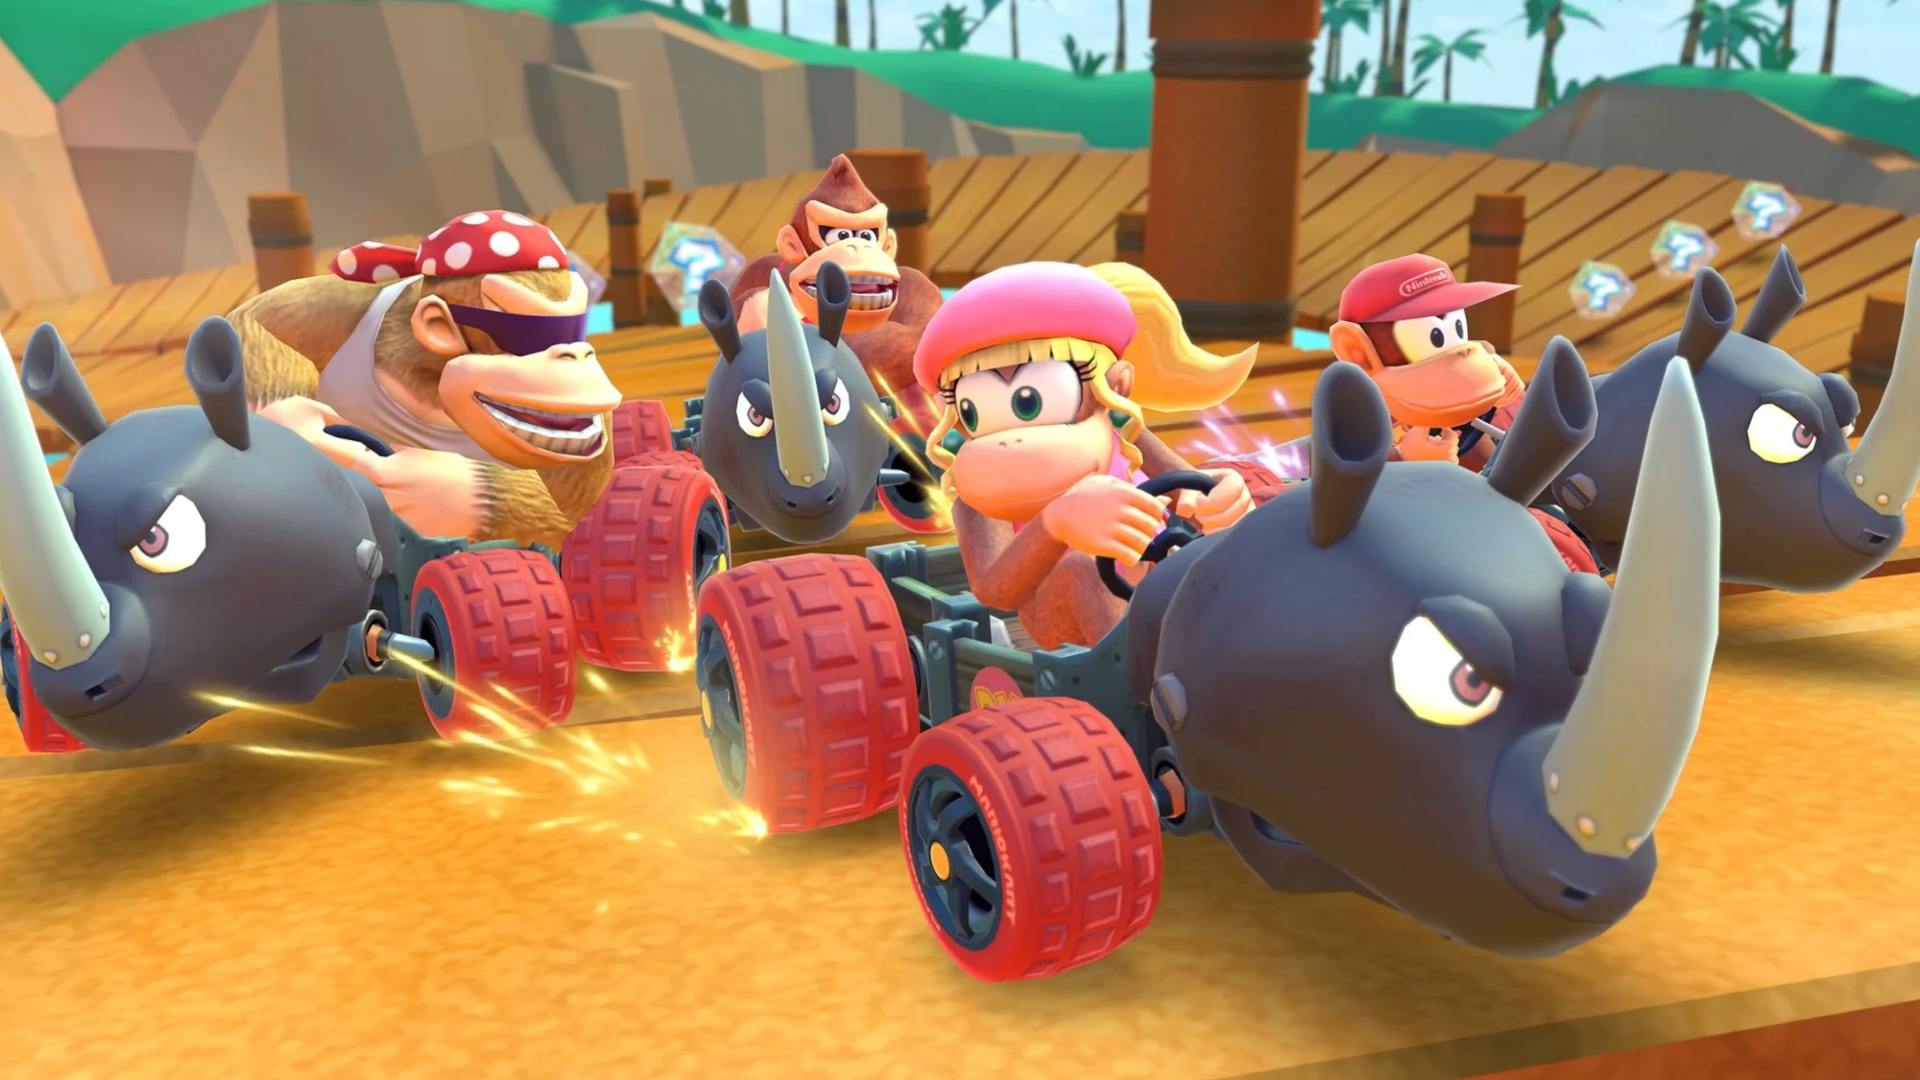 Addictive games - Mario Kart Tour. A screenshot shows Funky, Donkey, Diddy, and Dixie Kong racing in Rambi Riders in the Dino Dino Jungle track. Dixie is in the lead.